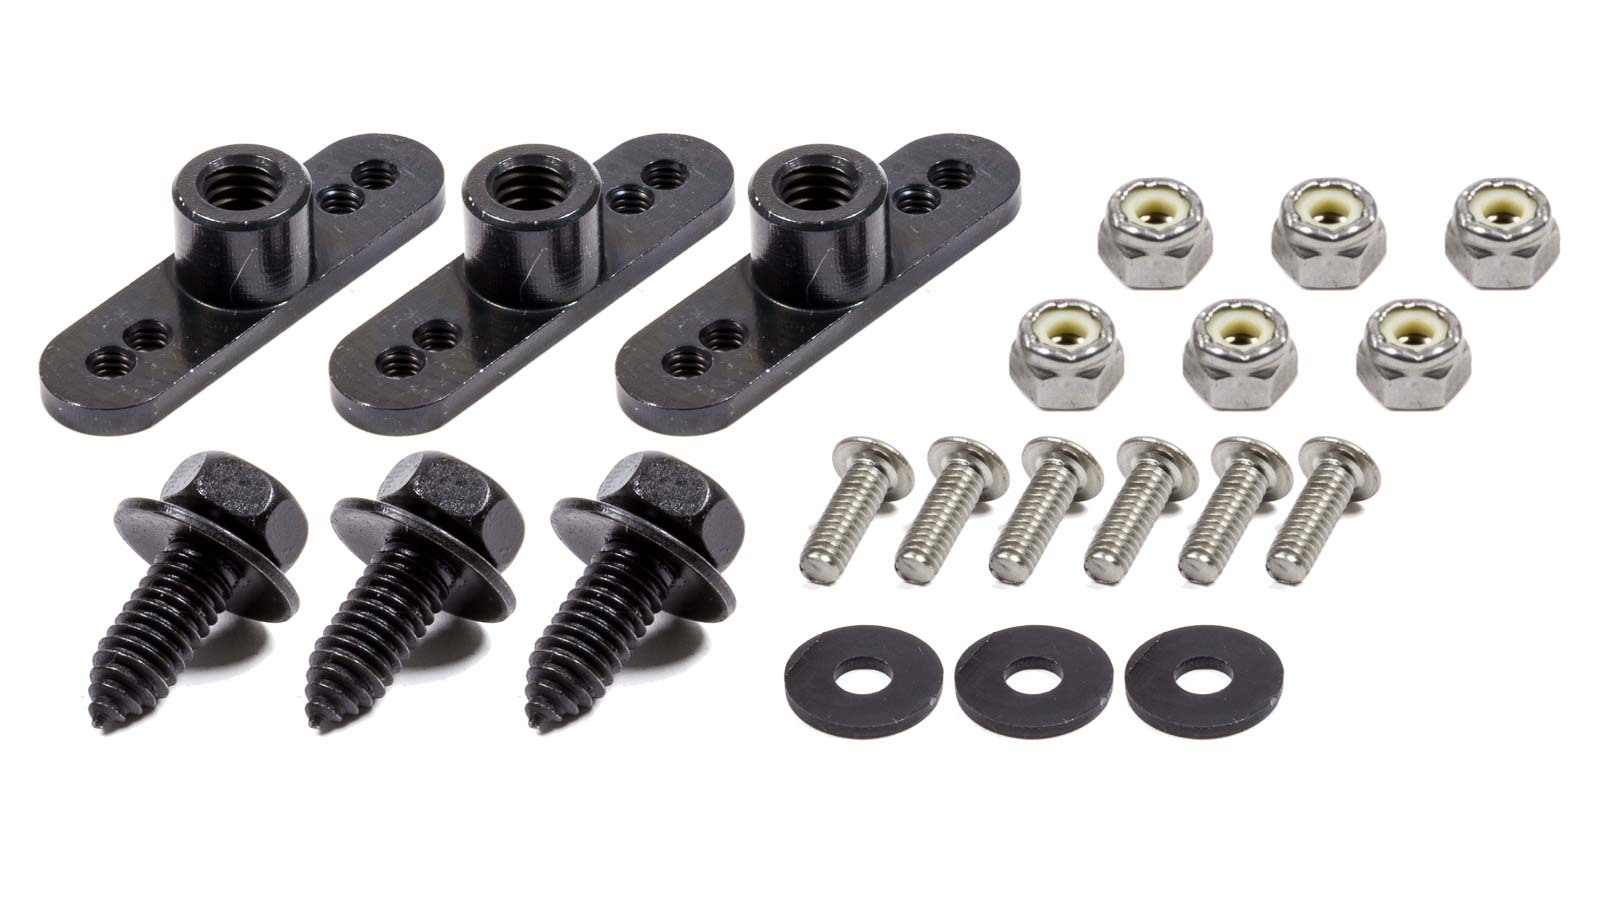 Wehrs Machine WM377S-312-3 Mud Cover Installation Kit, 5/16-18 in Thread, Screw-In Inserts / Bolts Included, Steel, Black Paint, Set of 3